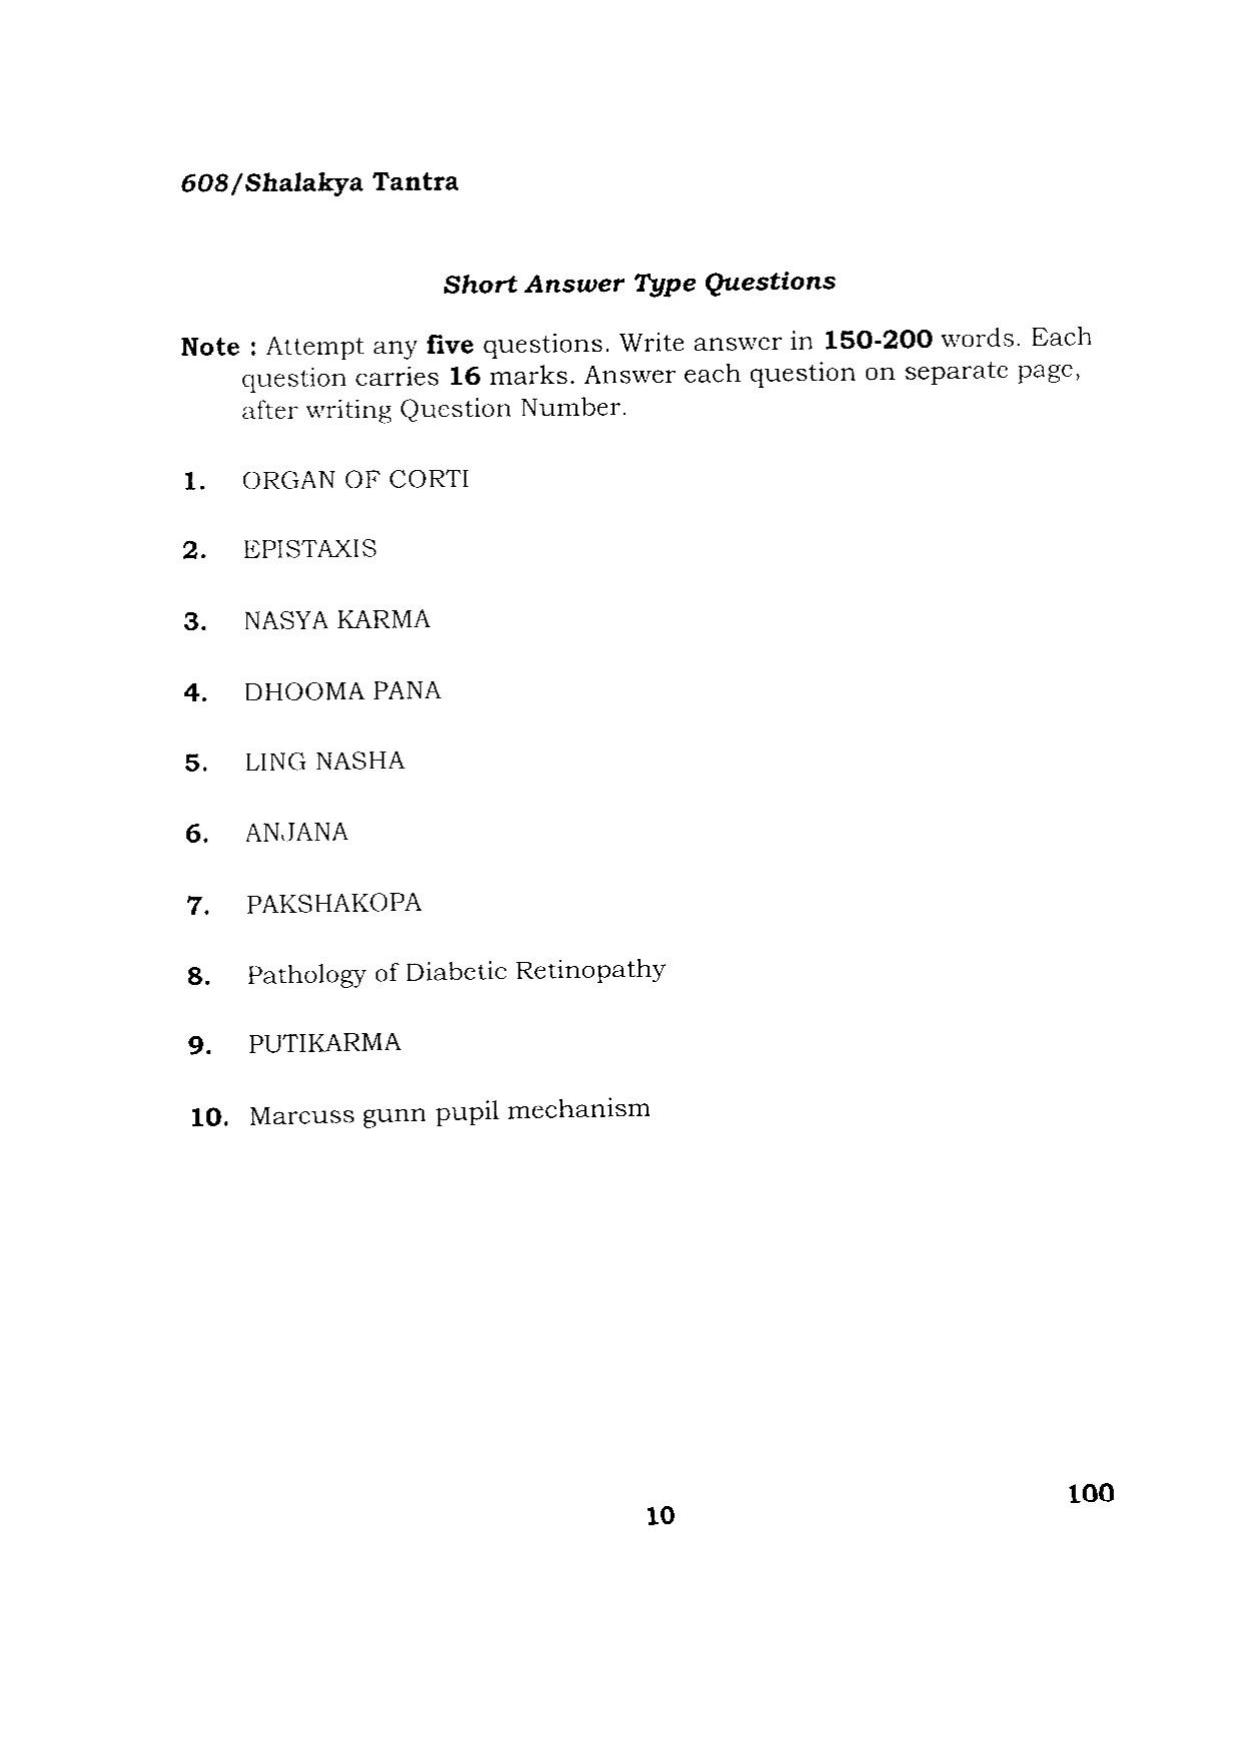 BHU RET SHALAKYA TANTRA 2015 Question Paper - Page 10